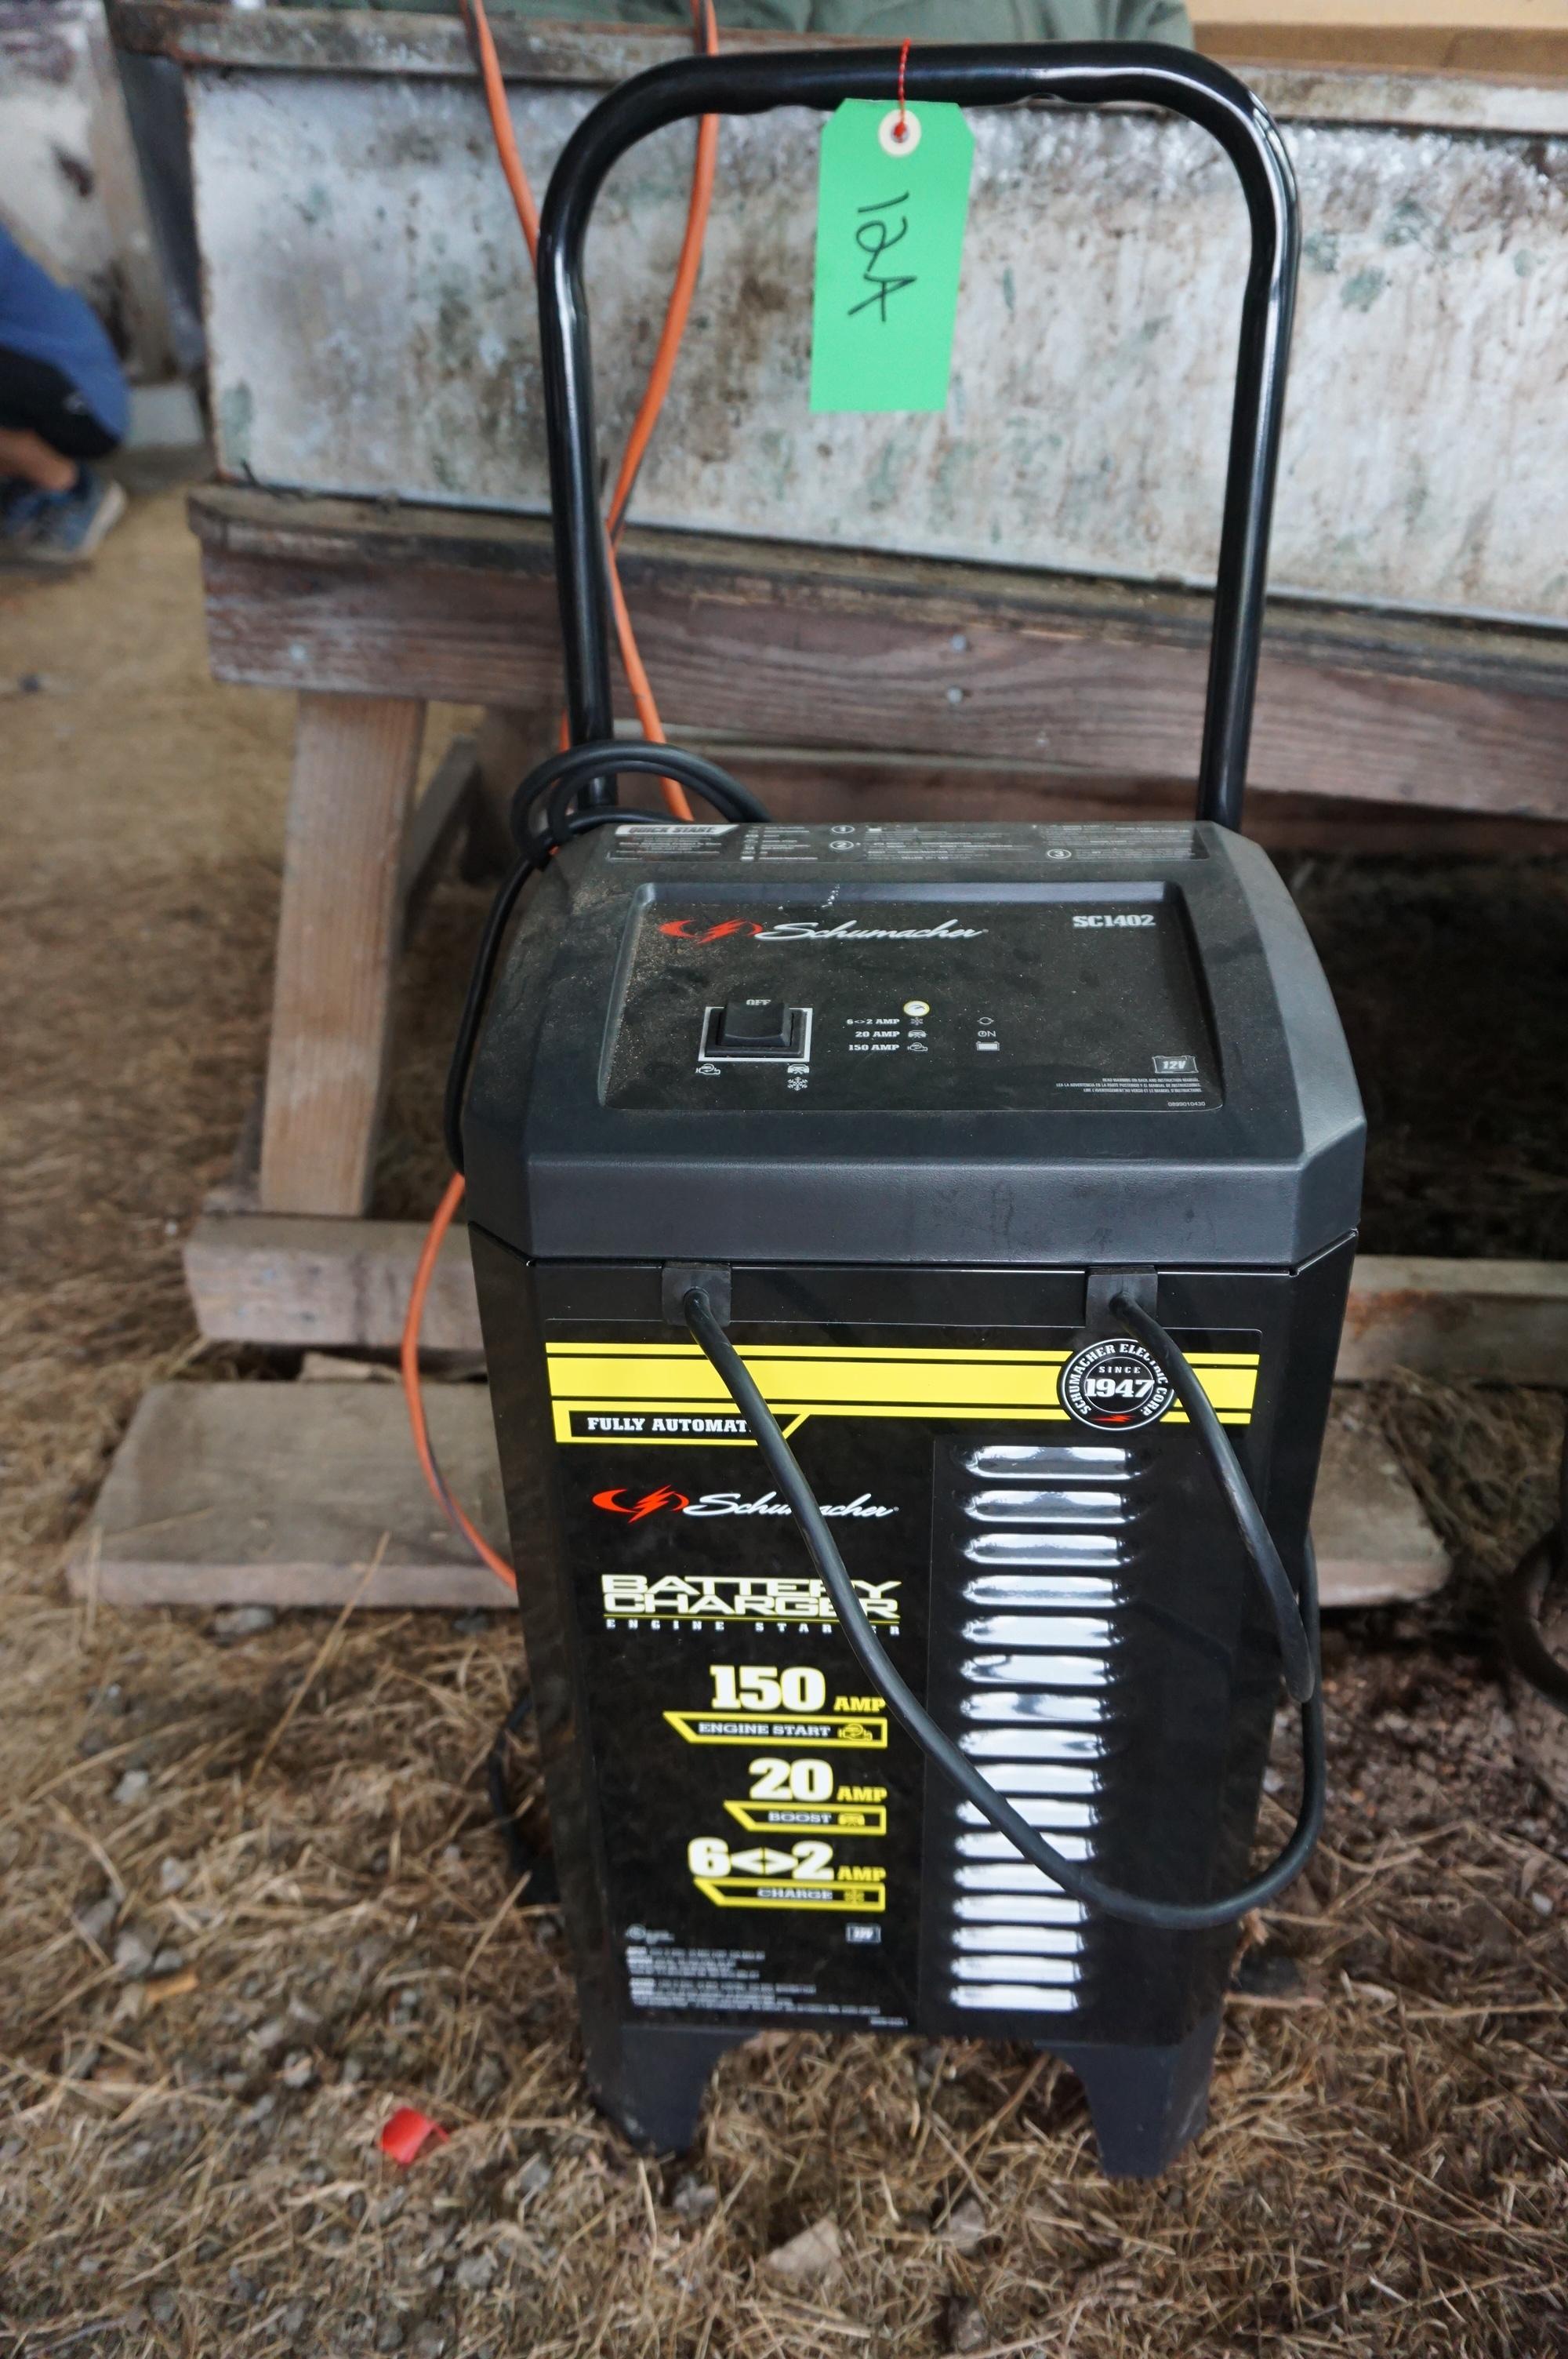 Schumacker Battery Charge, looks new, 150 amp